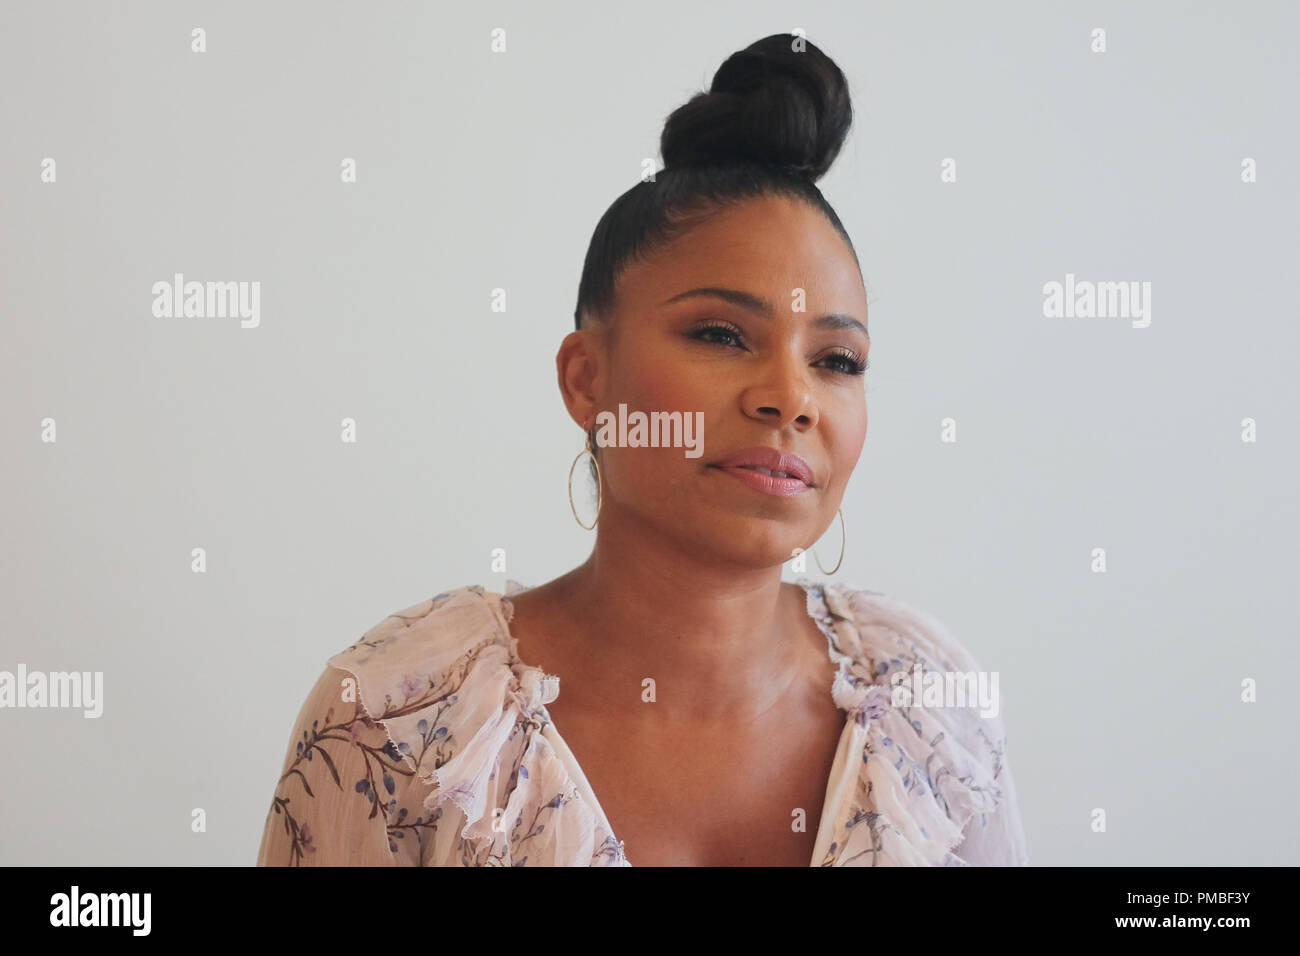 Sanaa Lathan at 'American Assassin' Press Conference held on July 24, 2017 at the Four Seasons Hotel in Beverly Hills,  California. No Tabloids. No USA sales for 30 days of origination. File Reference # 33384 017JRC  For Editorial Use Only -  All Rights Reserved Stock Photo